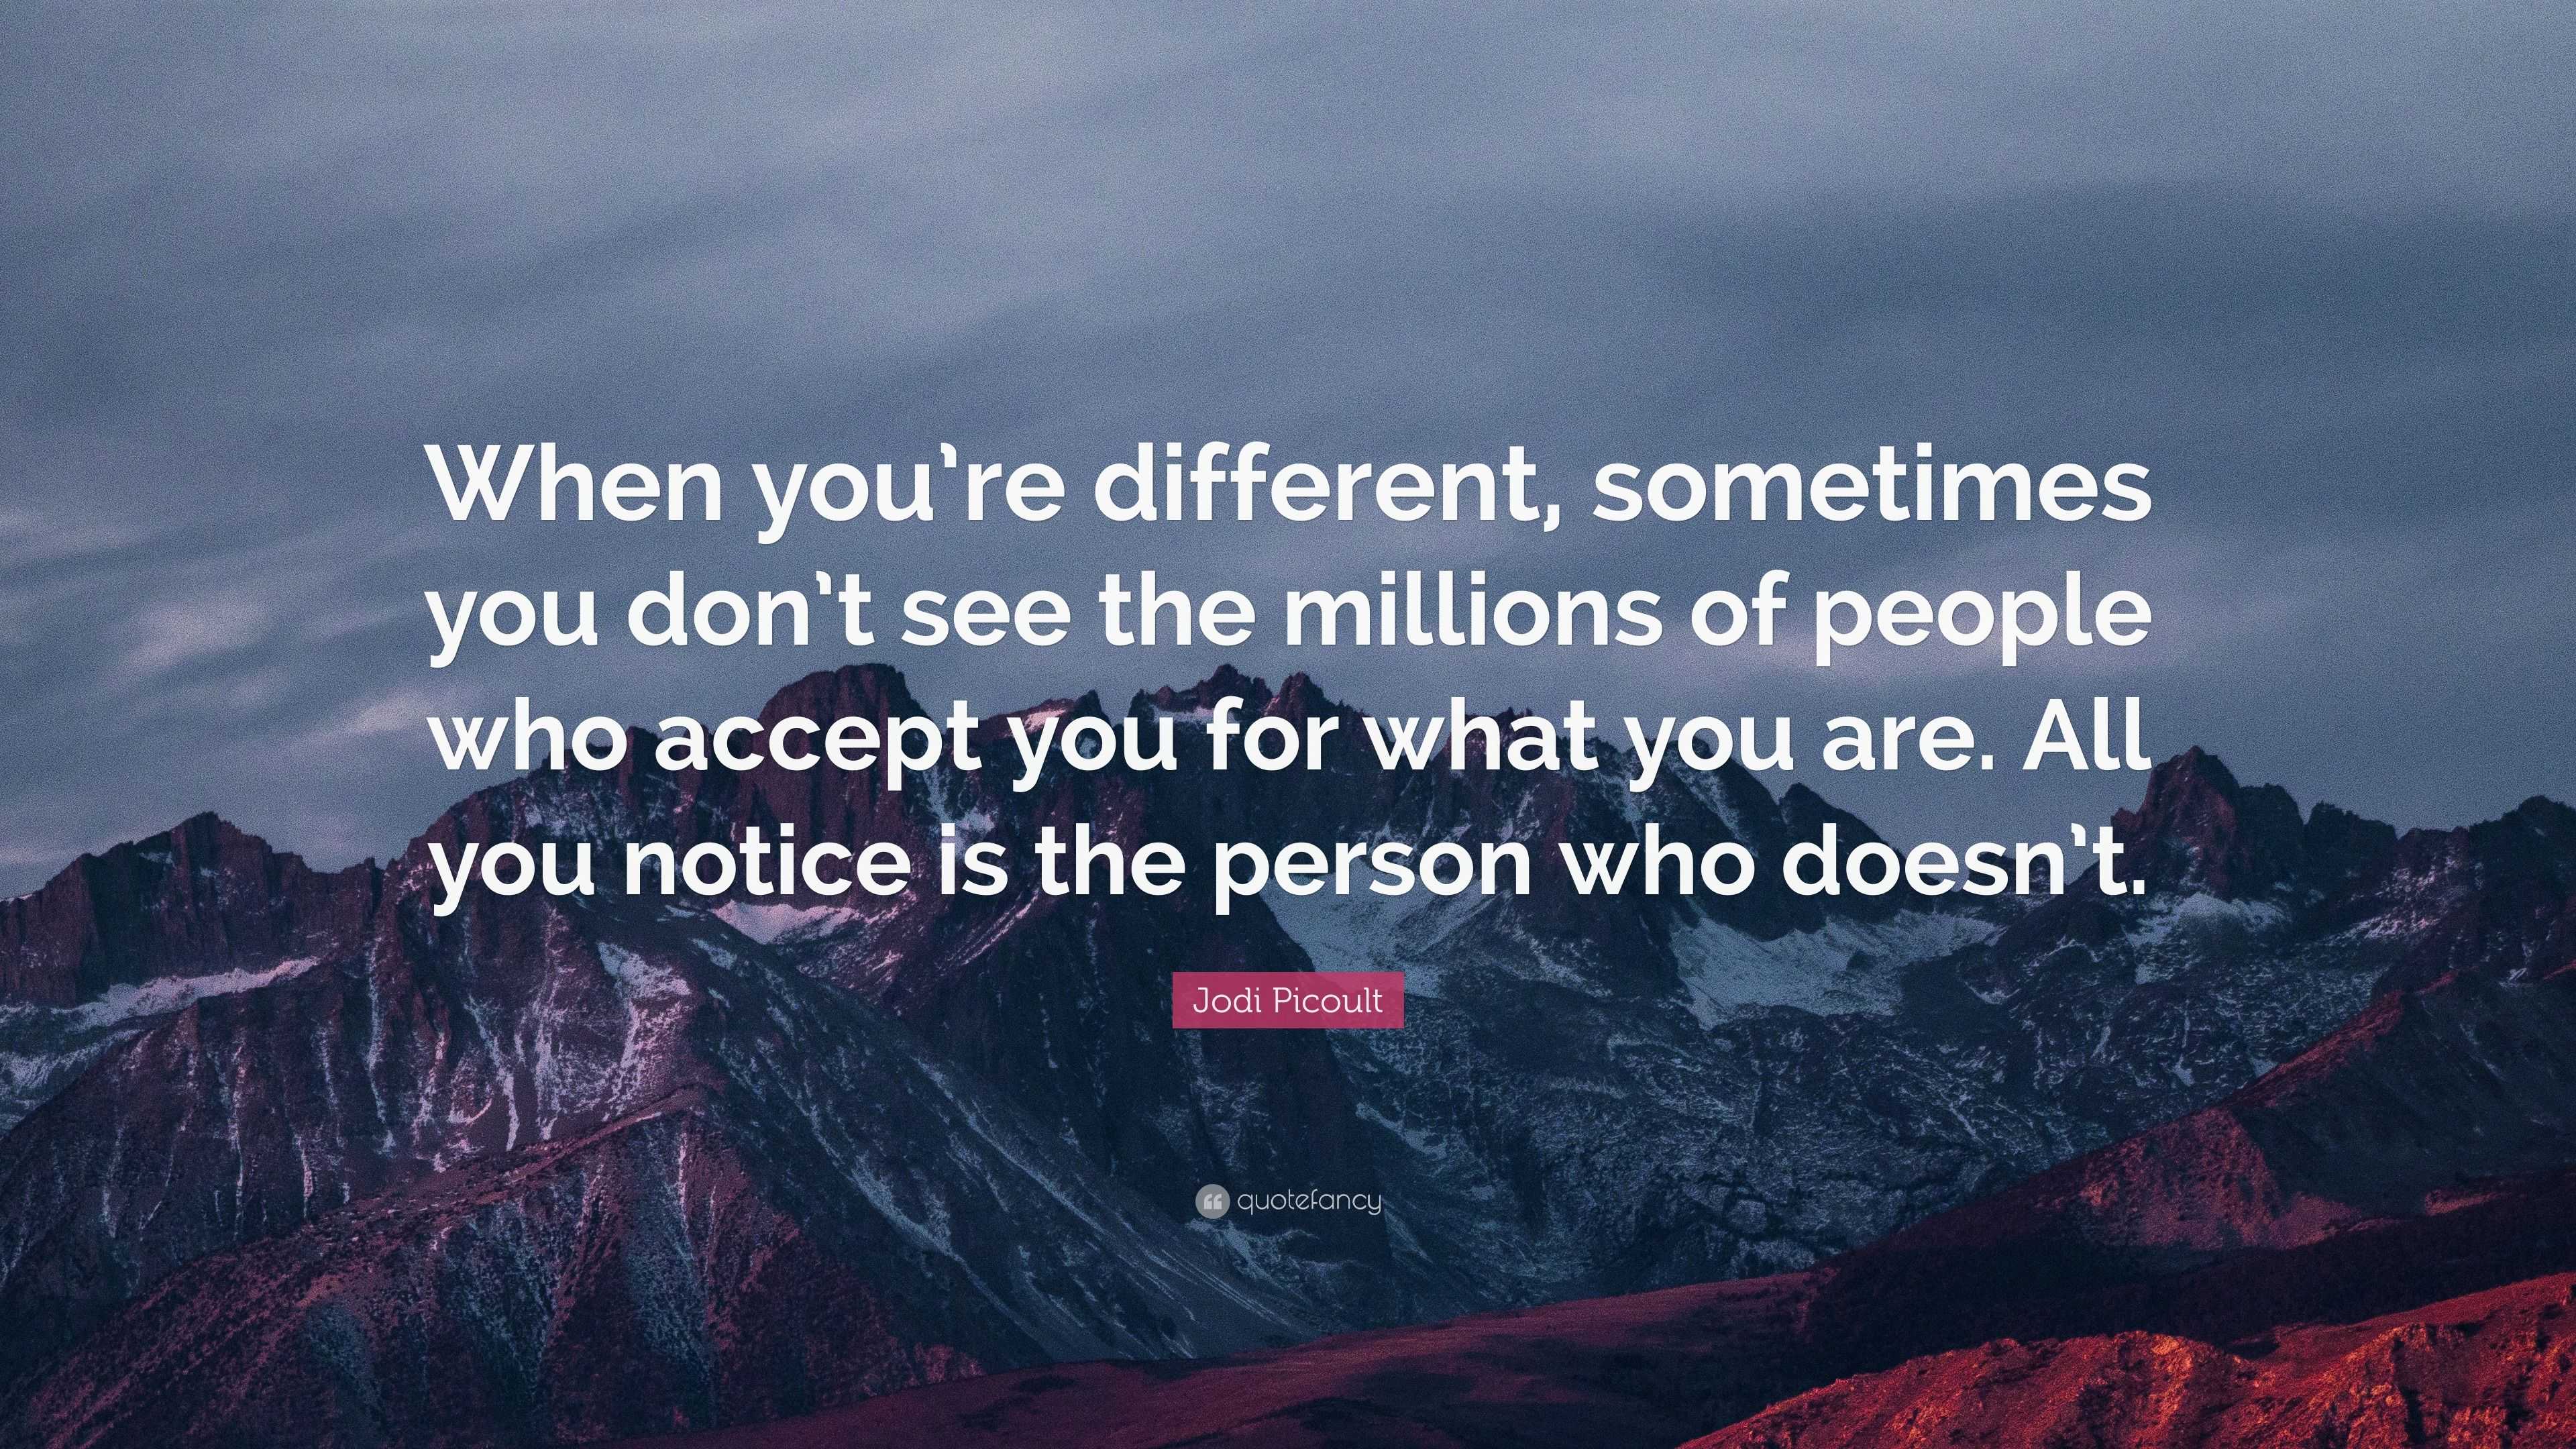 Jodi Picoult Quote: “When you’re different, sometimes you don’t see the ...